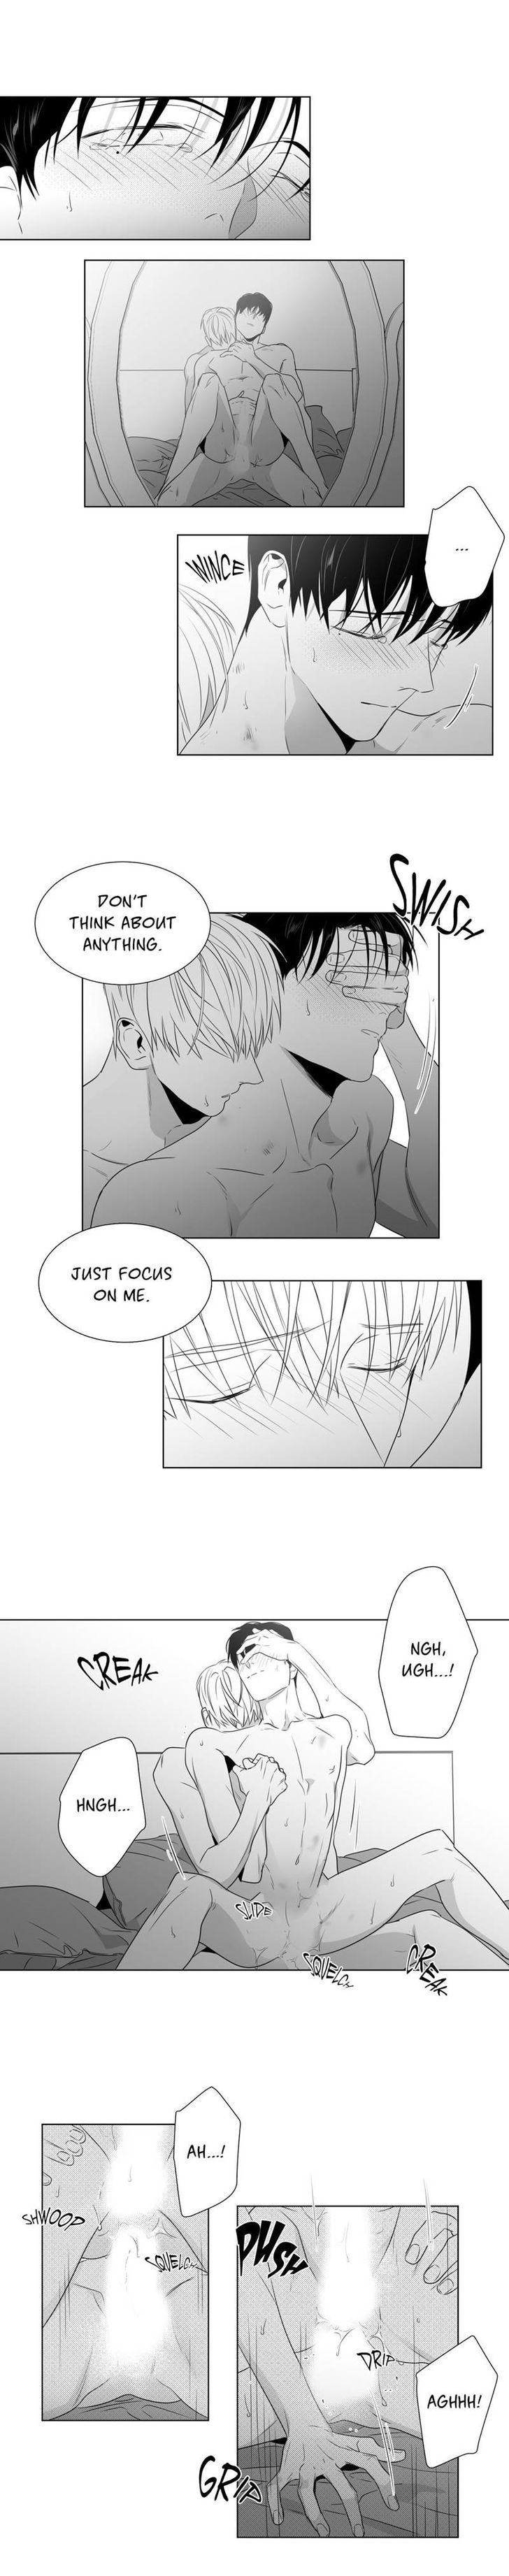 Lover Boy (Lezhin) Chapter 047 page 7